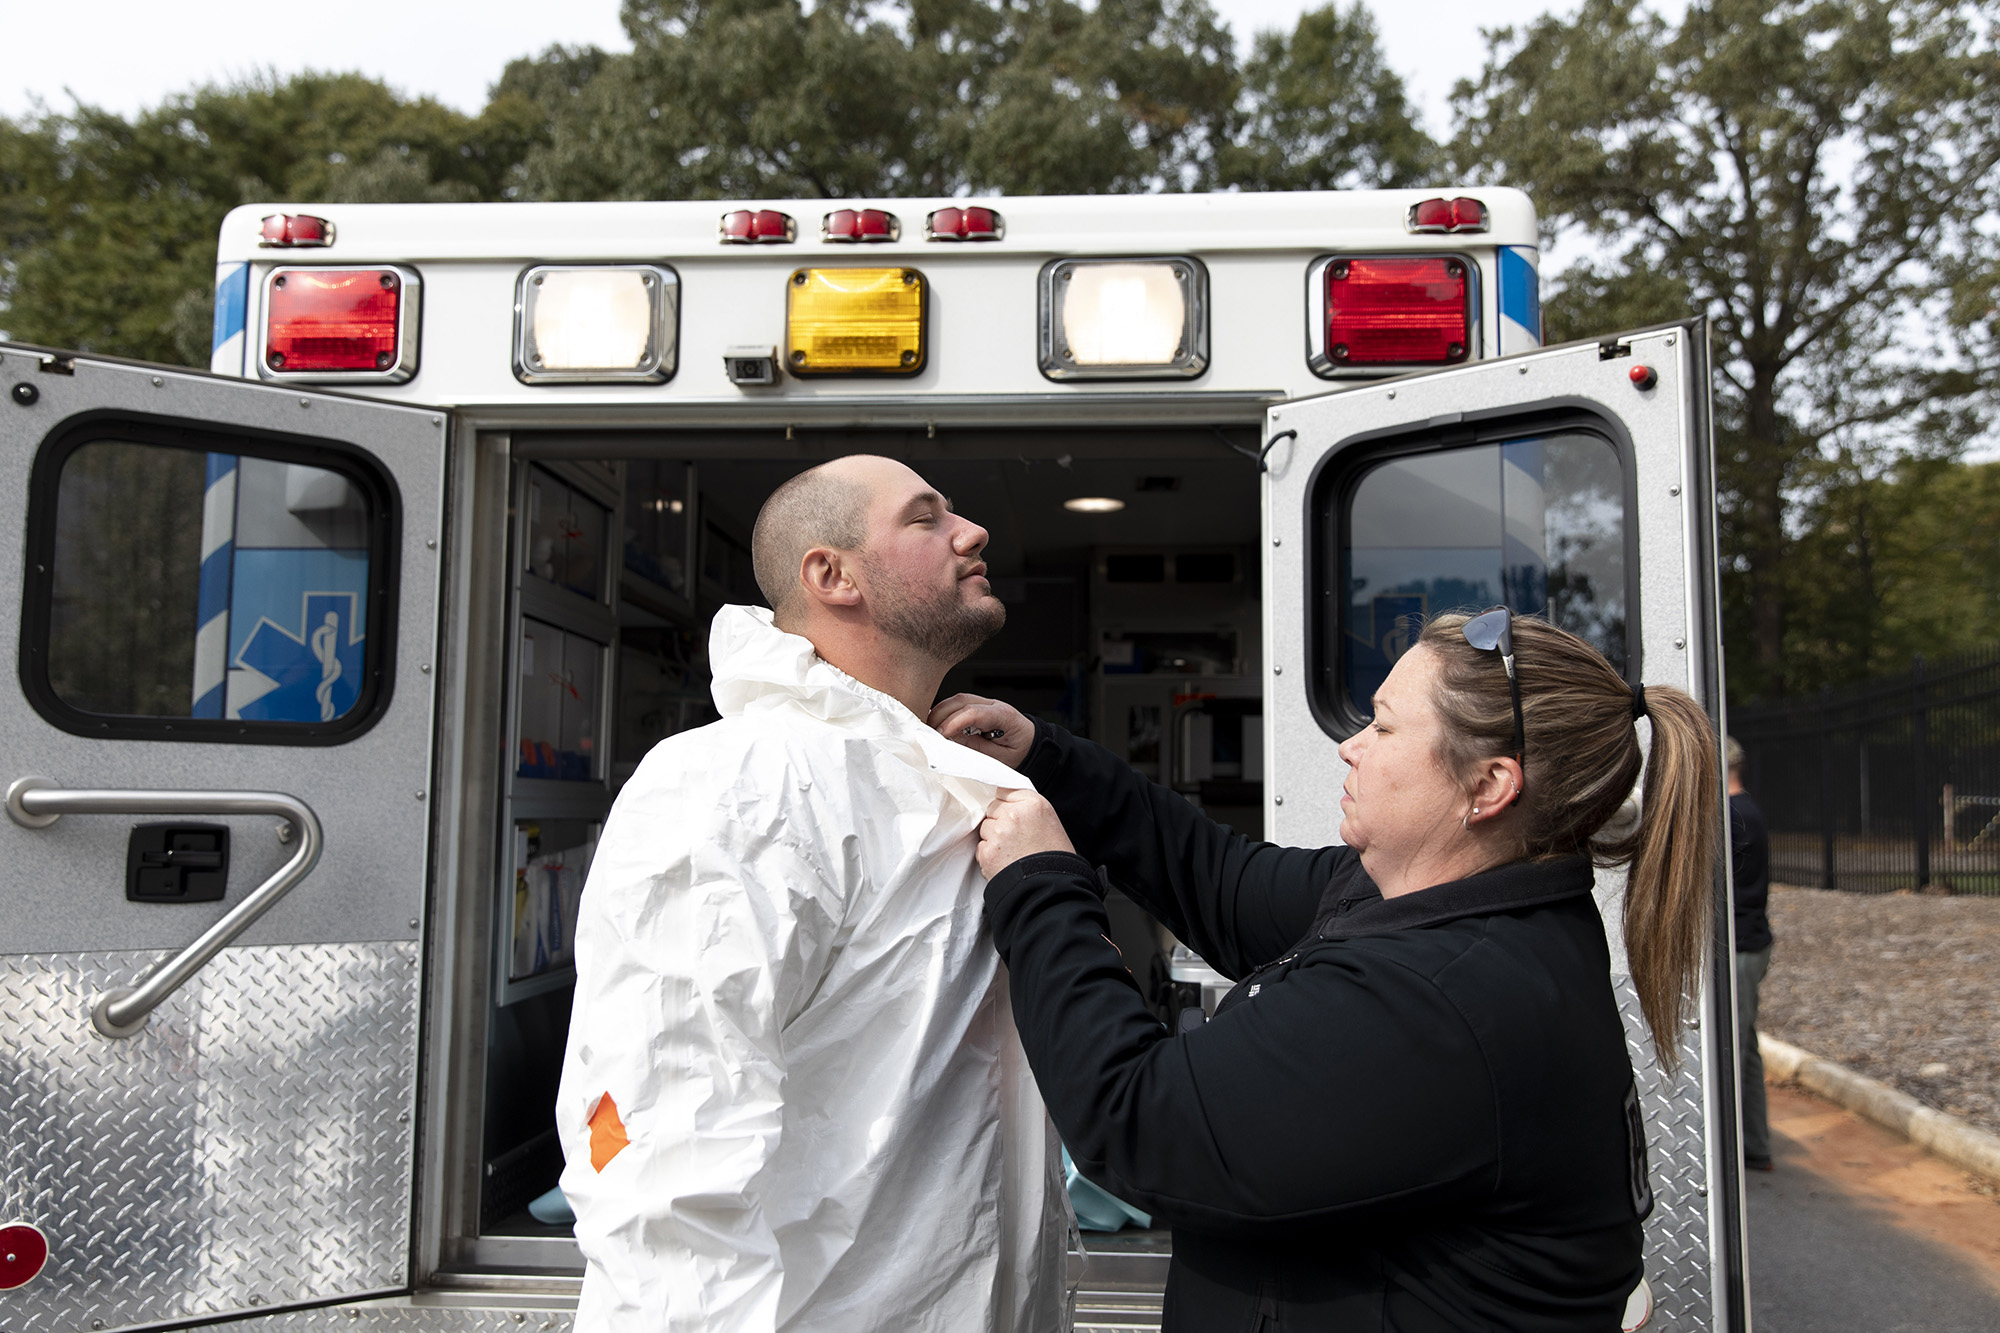 How first responders can protect themselves